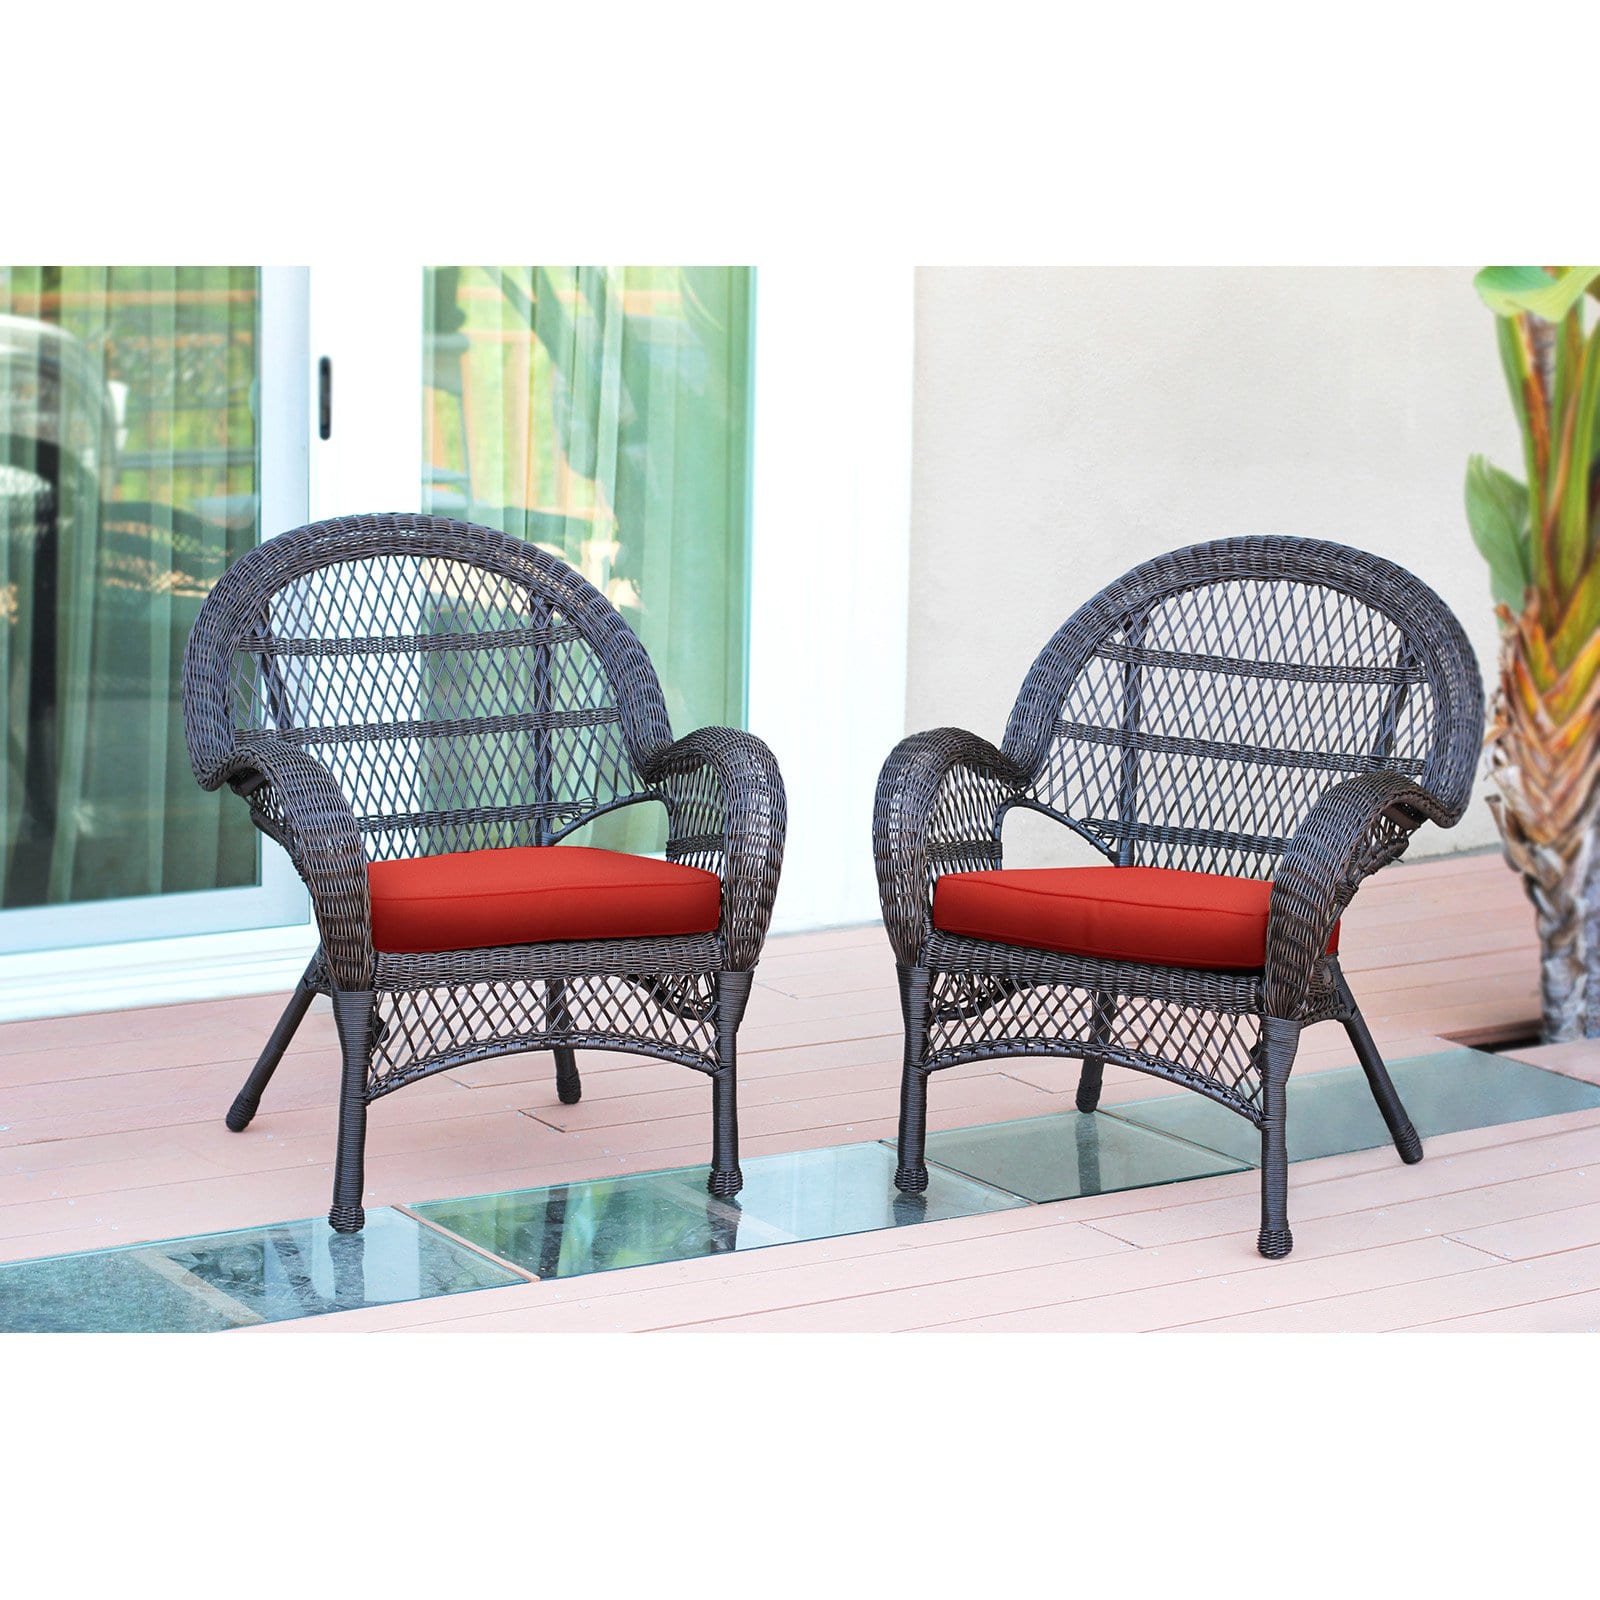 Jeco Santa Maria Wicker Patio Chairs with Optional Cushion - Set of 2 - image 5 of 11